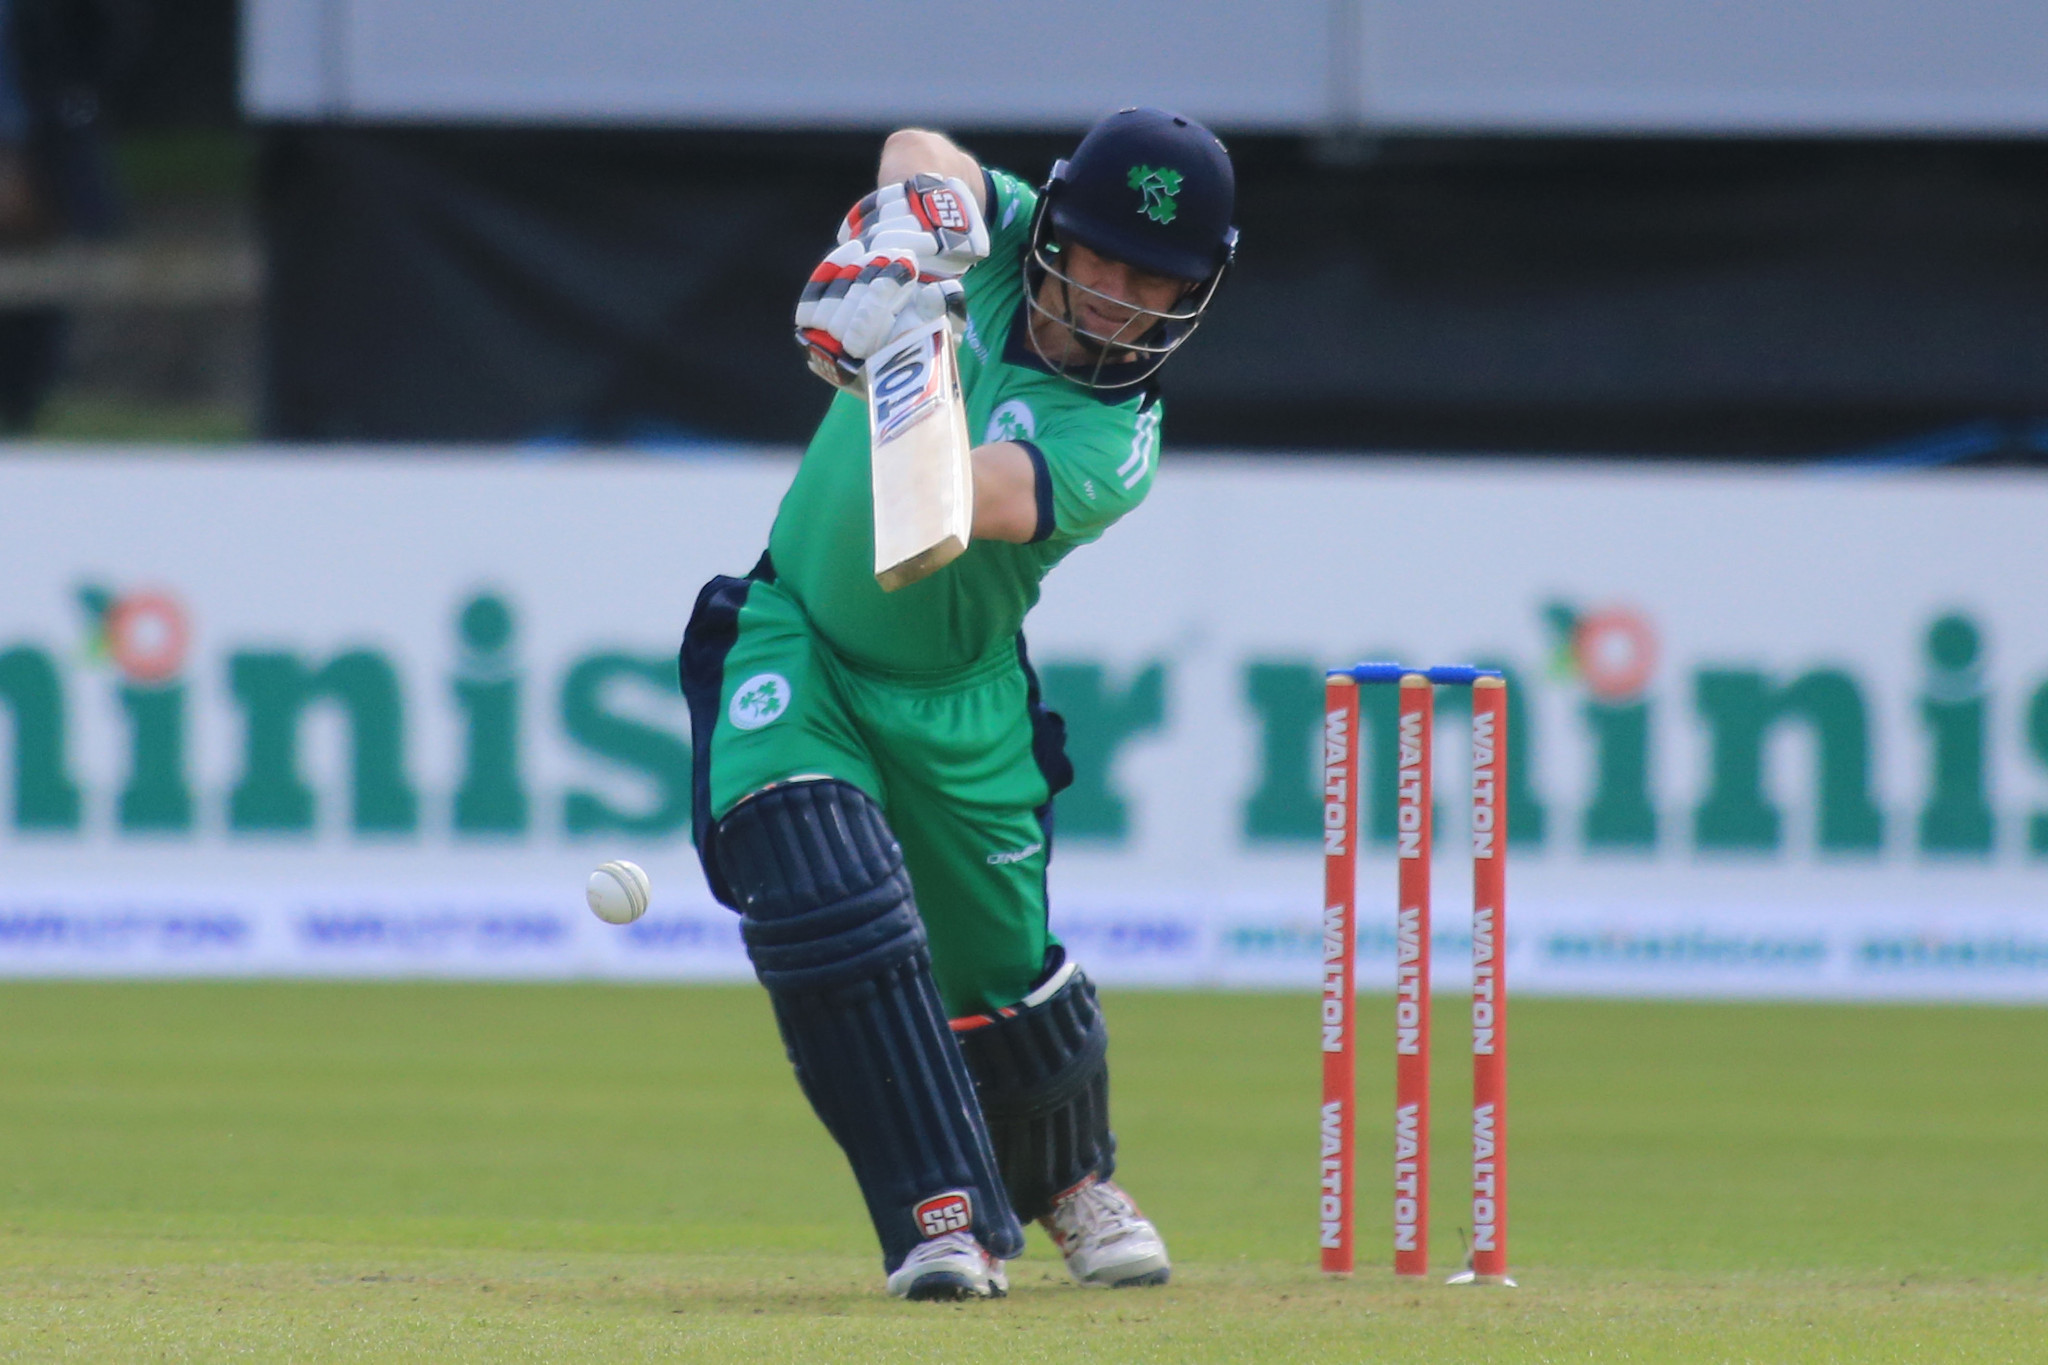 Irish cricket captain William Porterfield says there will be an 